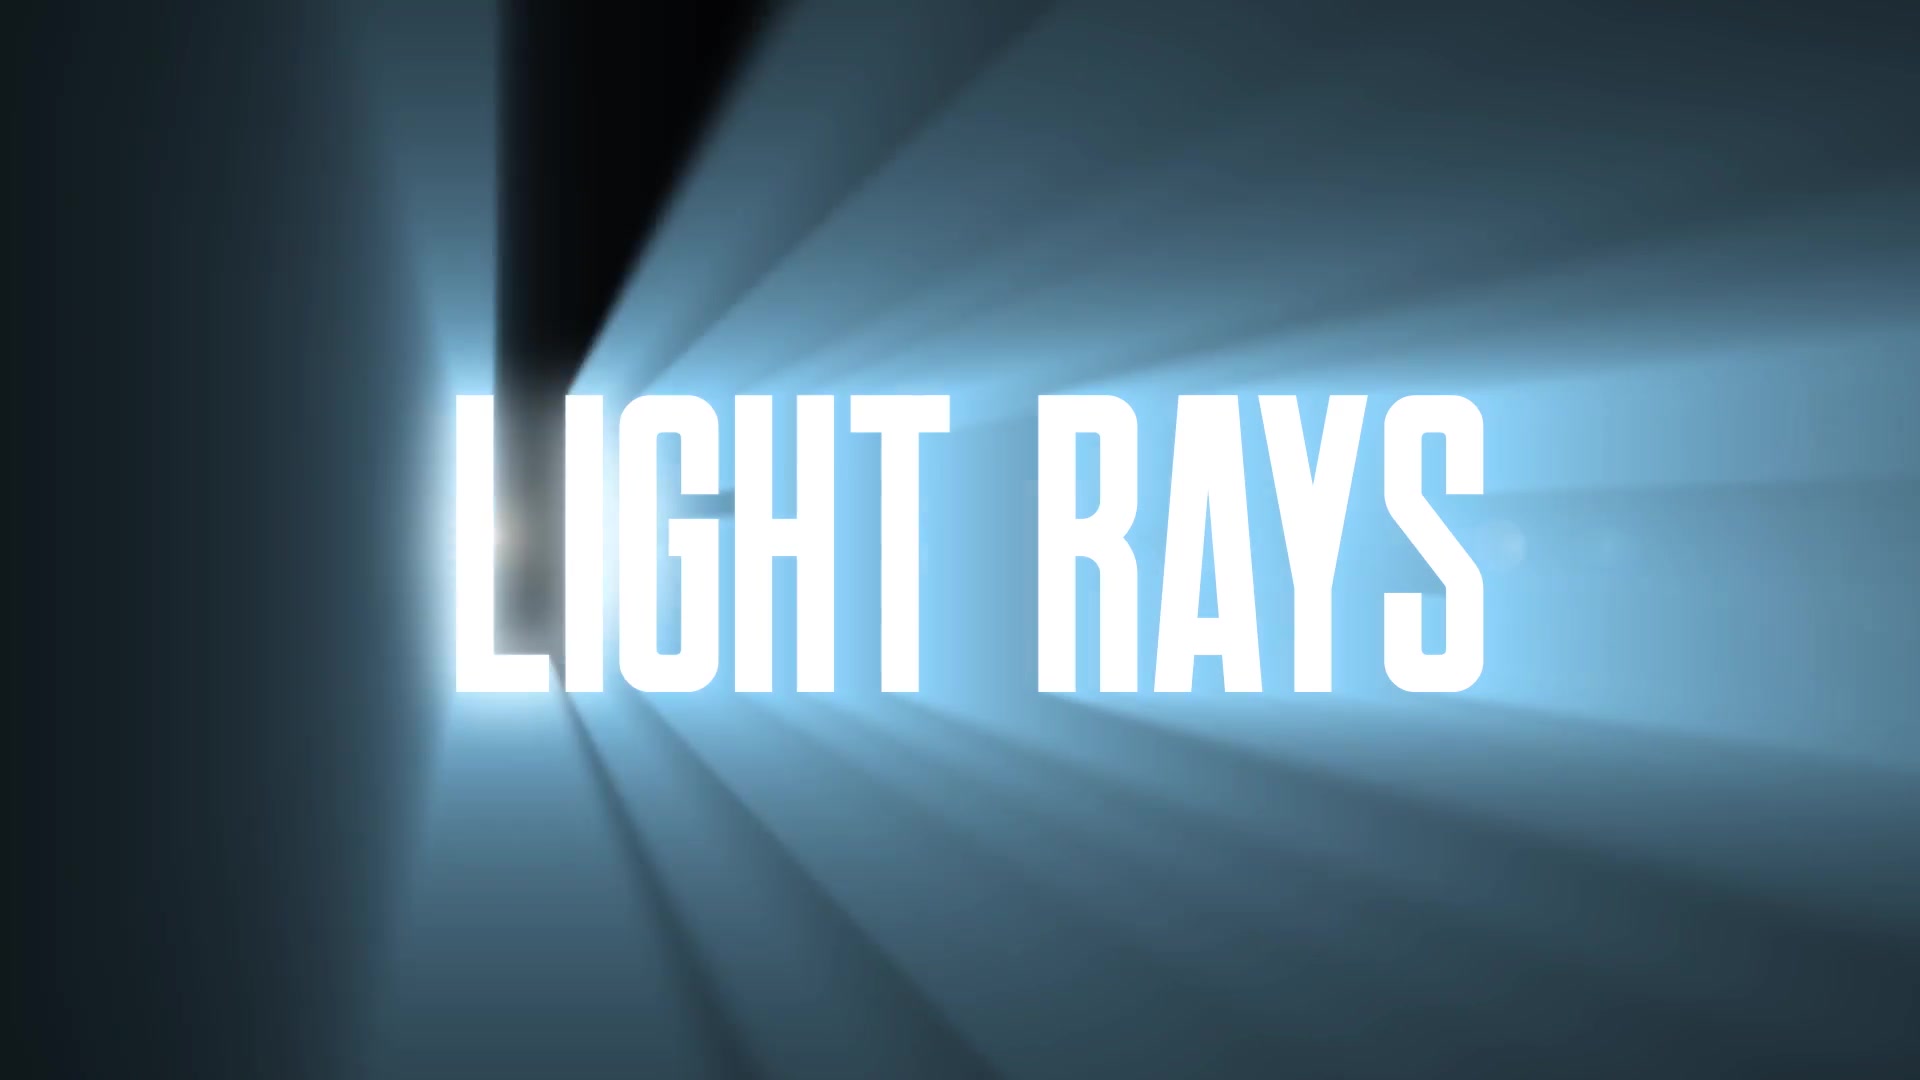 after effects cc light rays free download